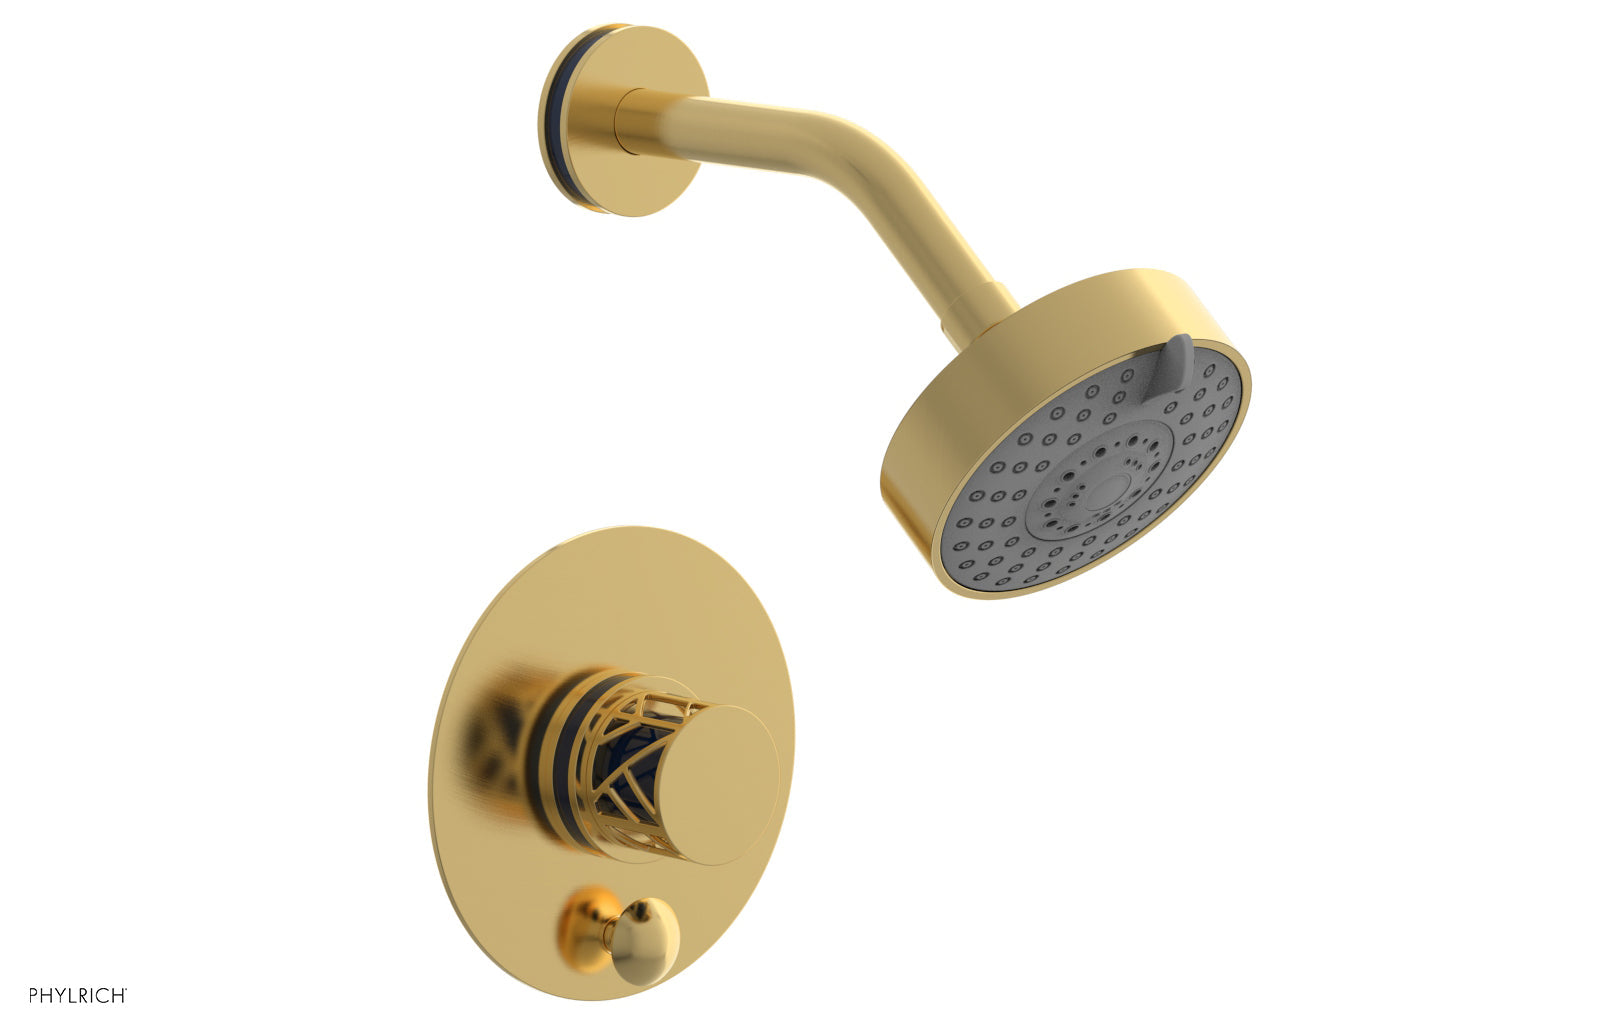 Phylrich JOLIE Pressure Balance Shower and Diverter Set (Less Spout), Round Handle with "Navy Blue" Accents